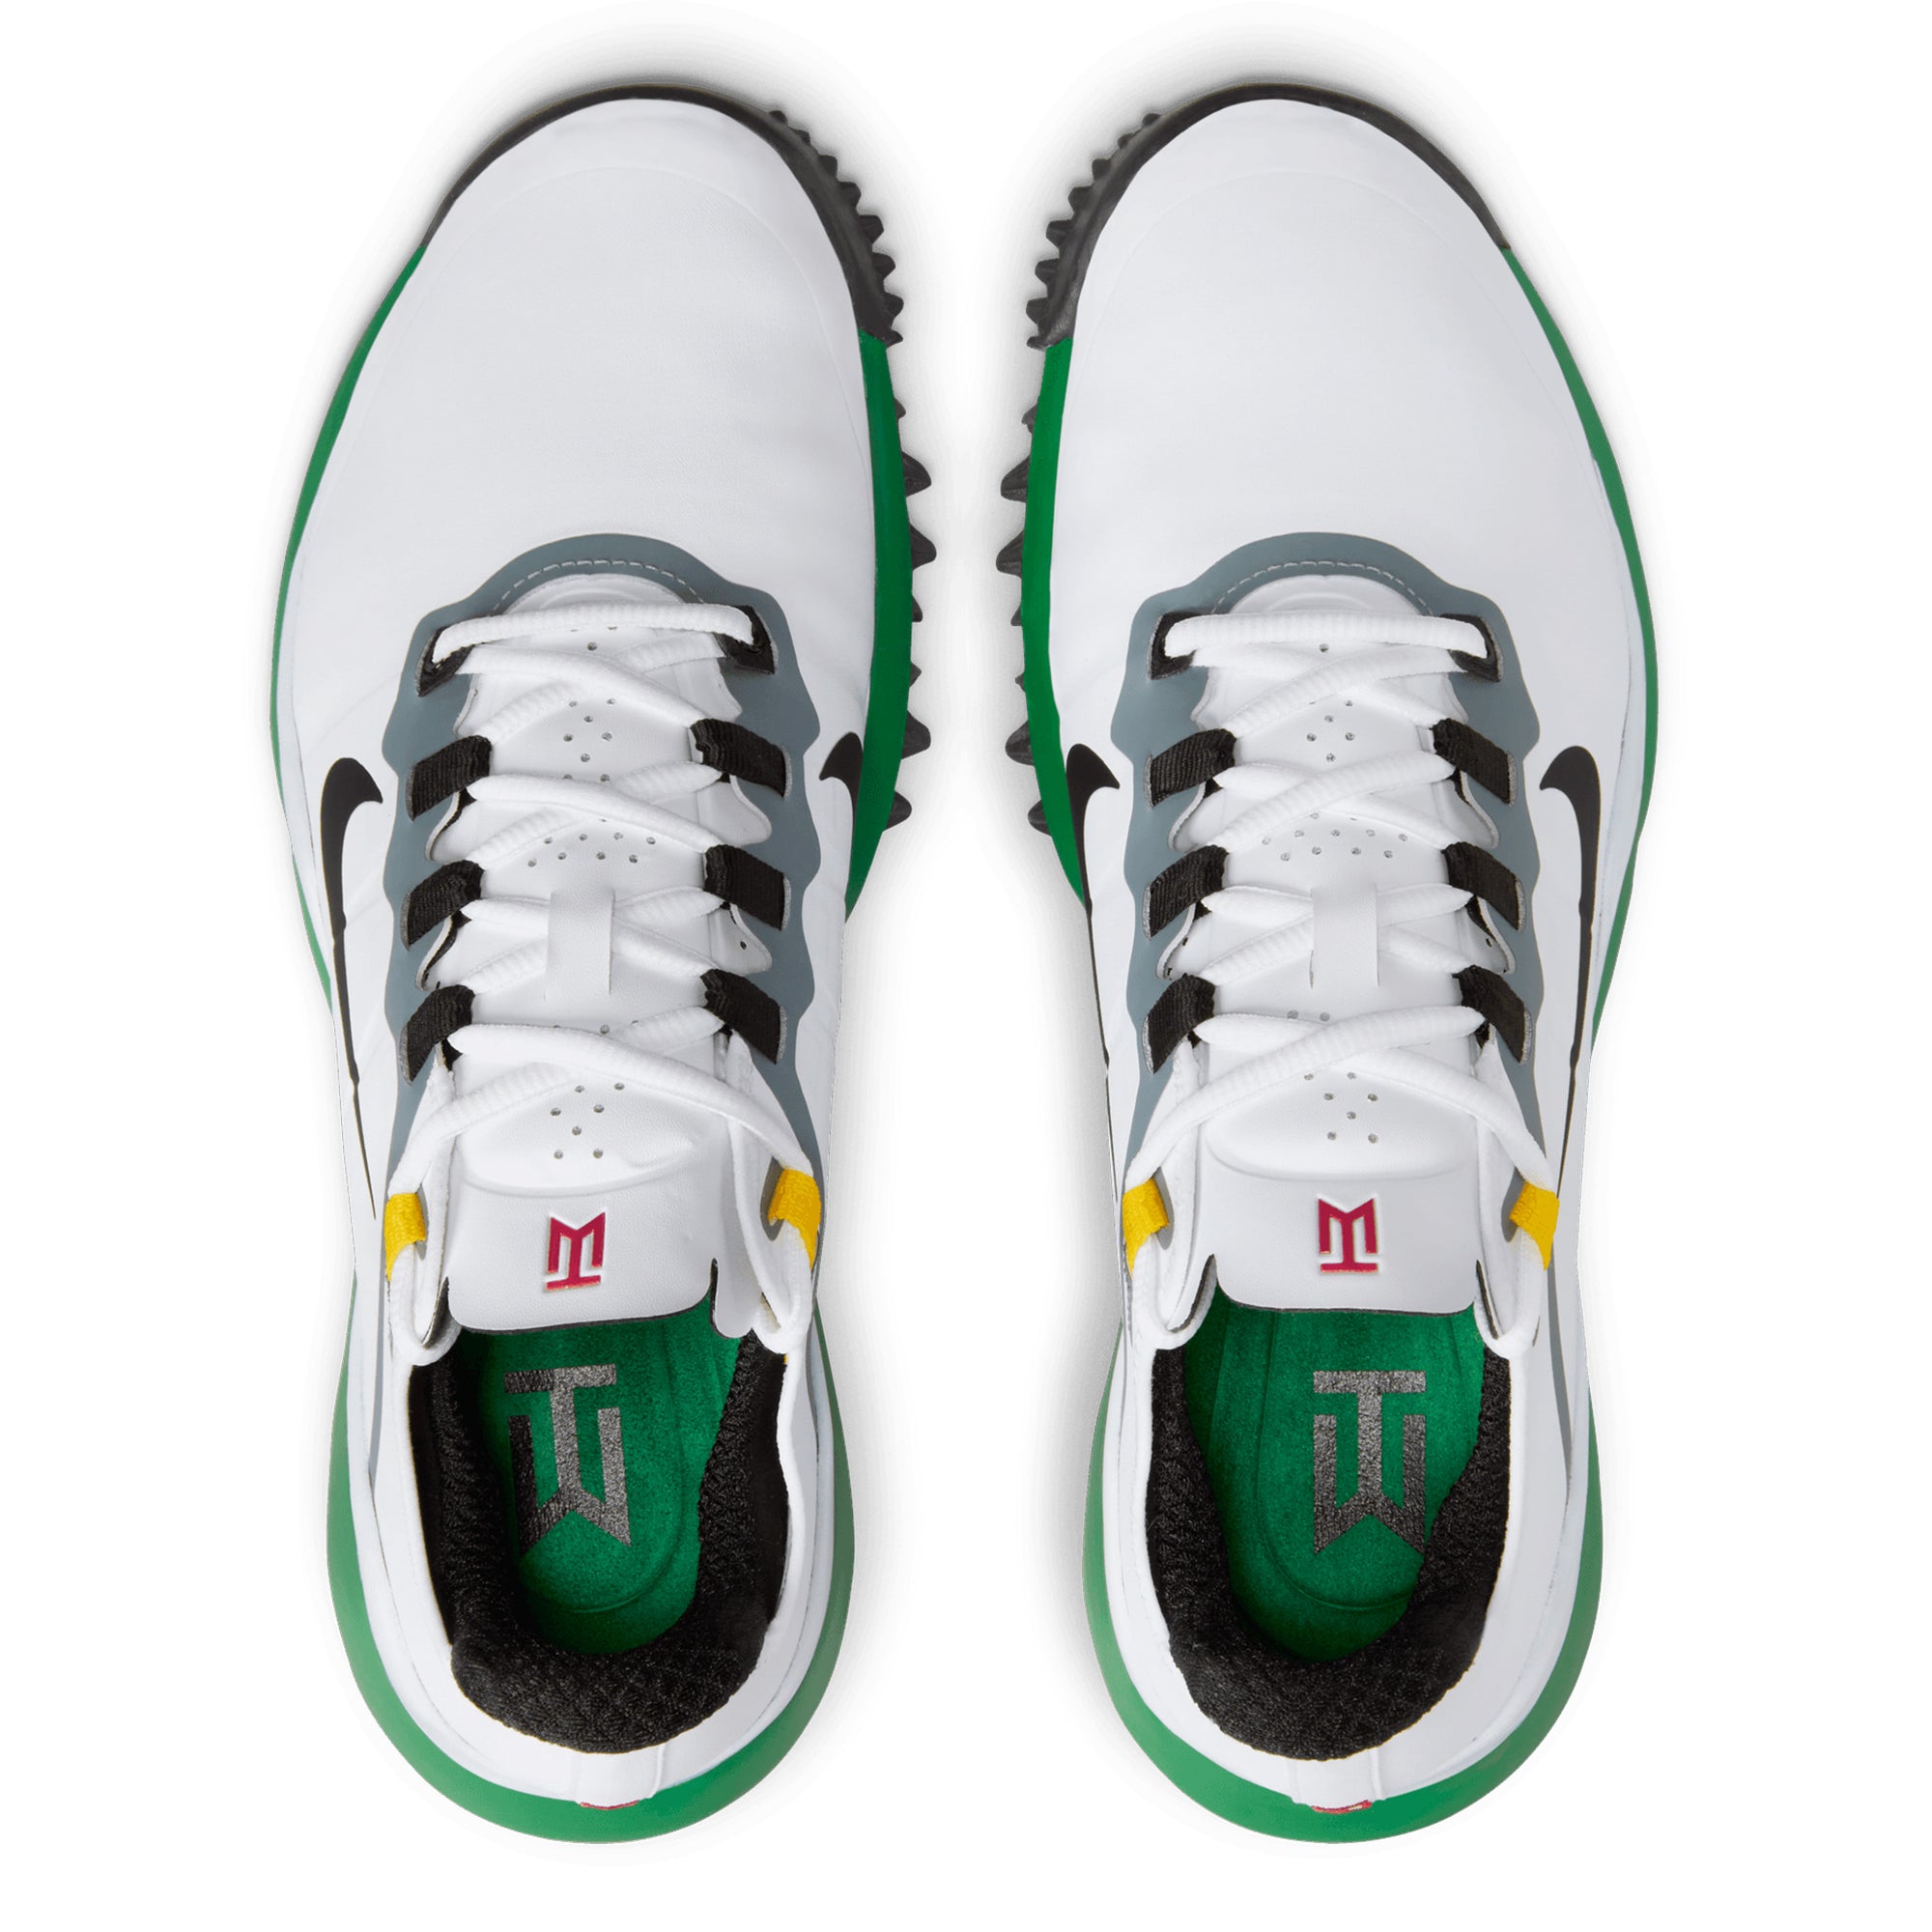 Nike Golf TW 13 Shoes DR5752 White Black Pine Green 100 & Function18